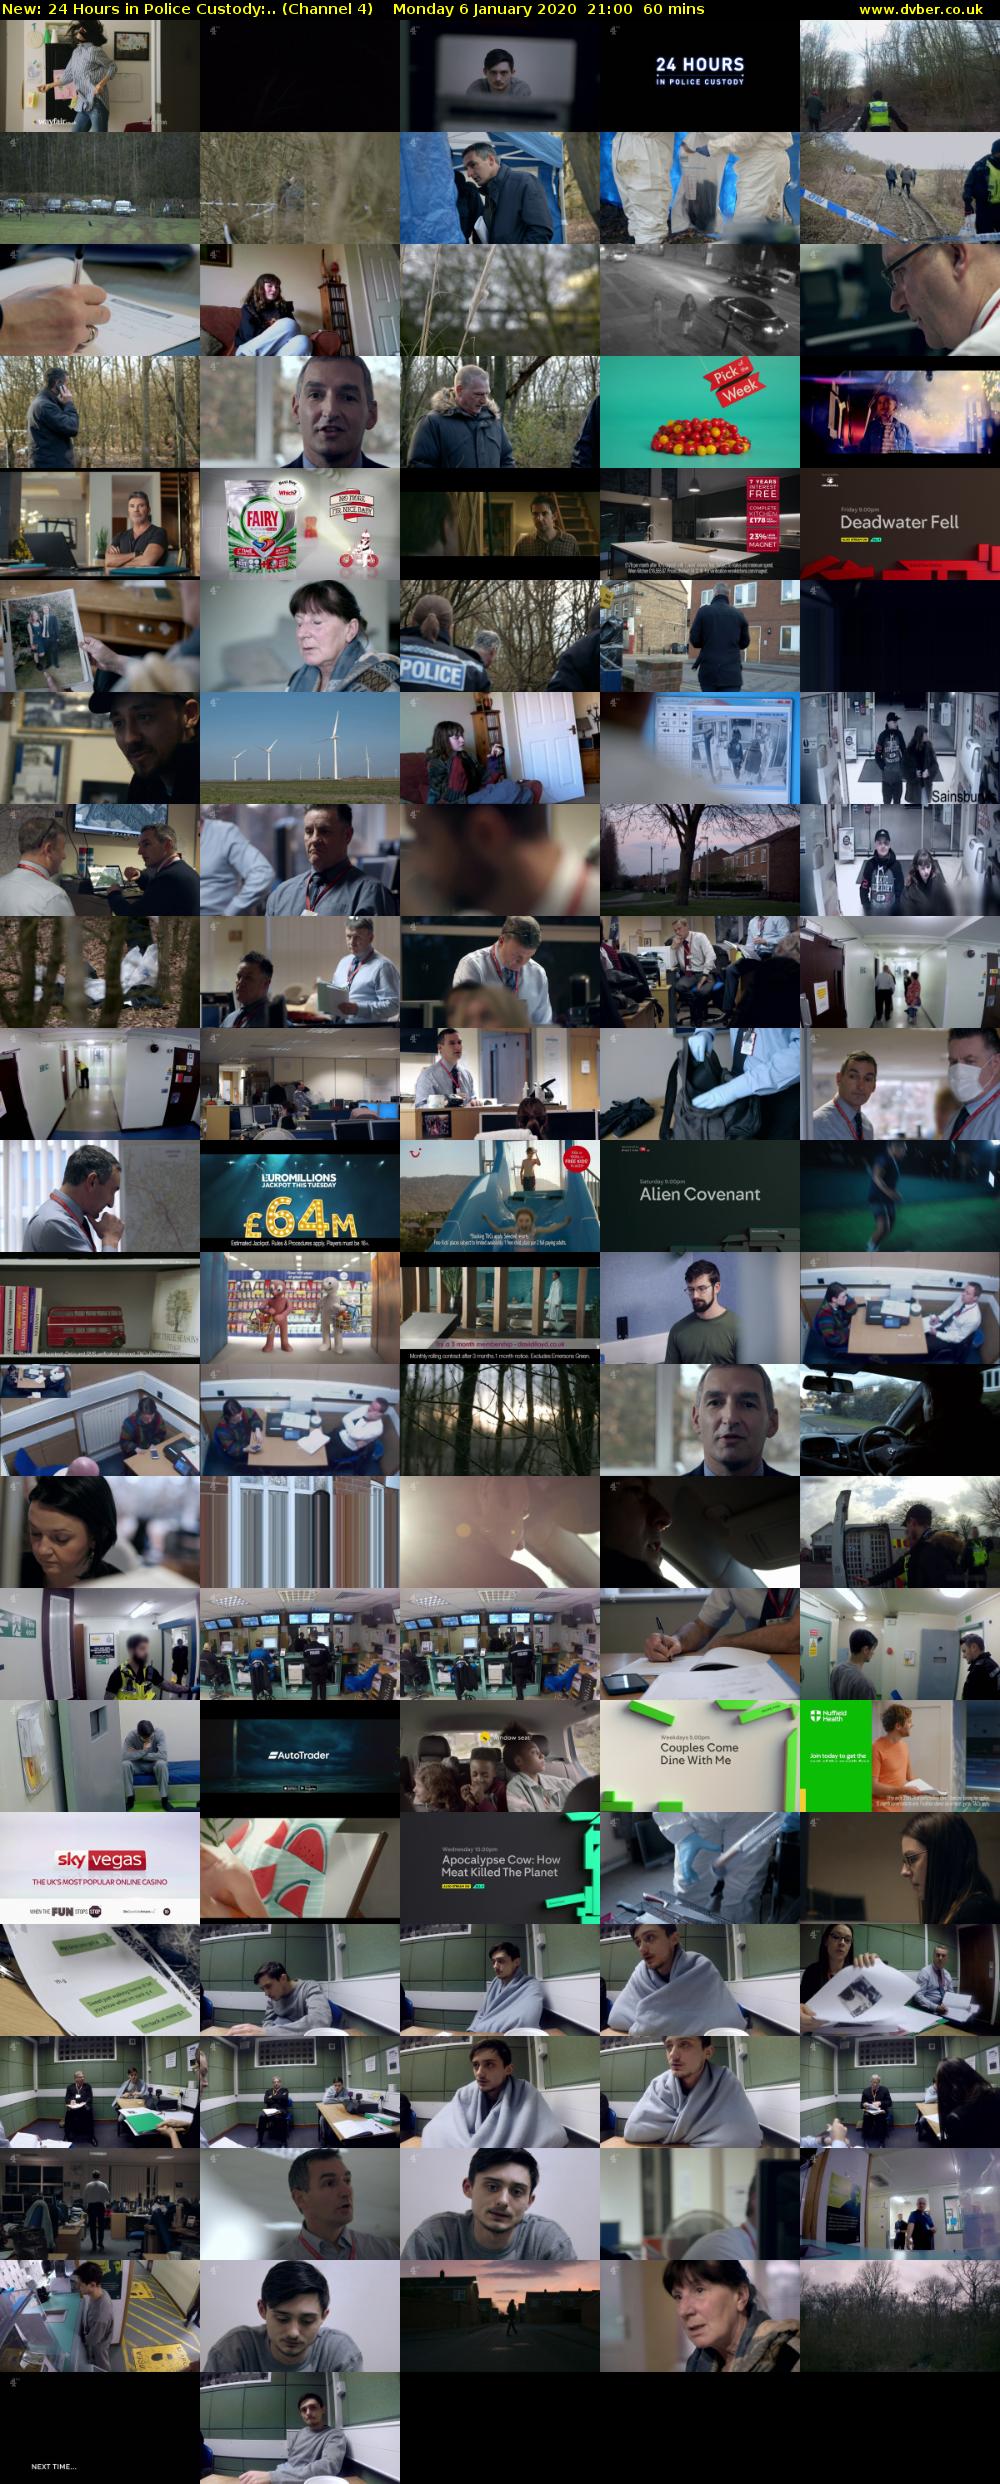 24 Hours in Police Custody:.. (Channel 4) Monday 6 January 2020 21:00 - 22:00